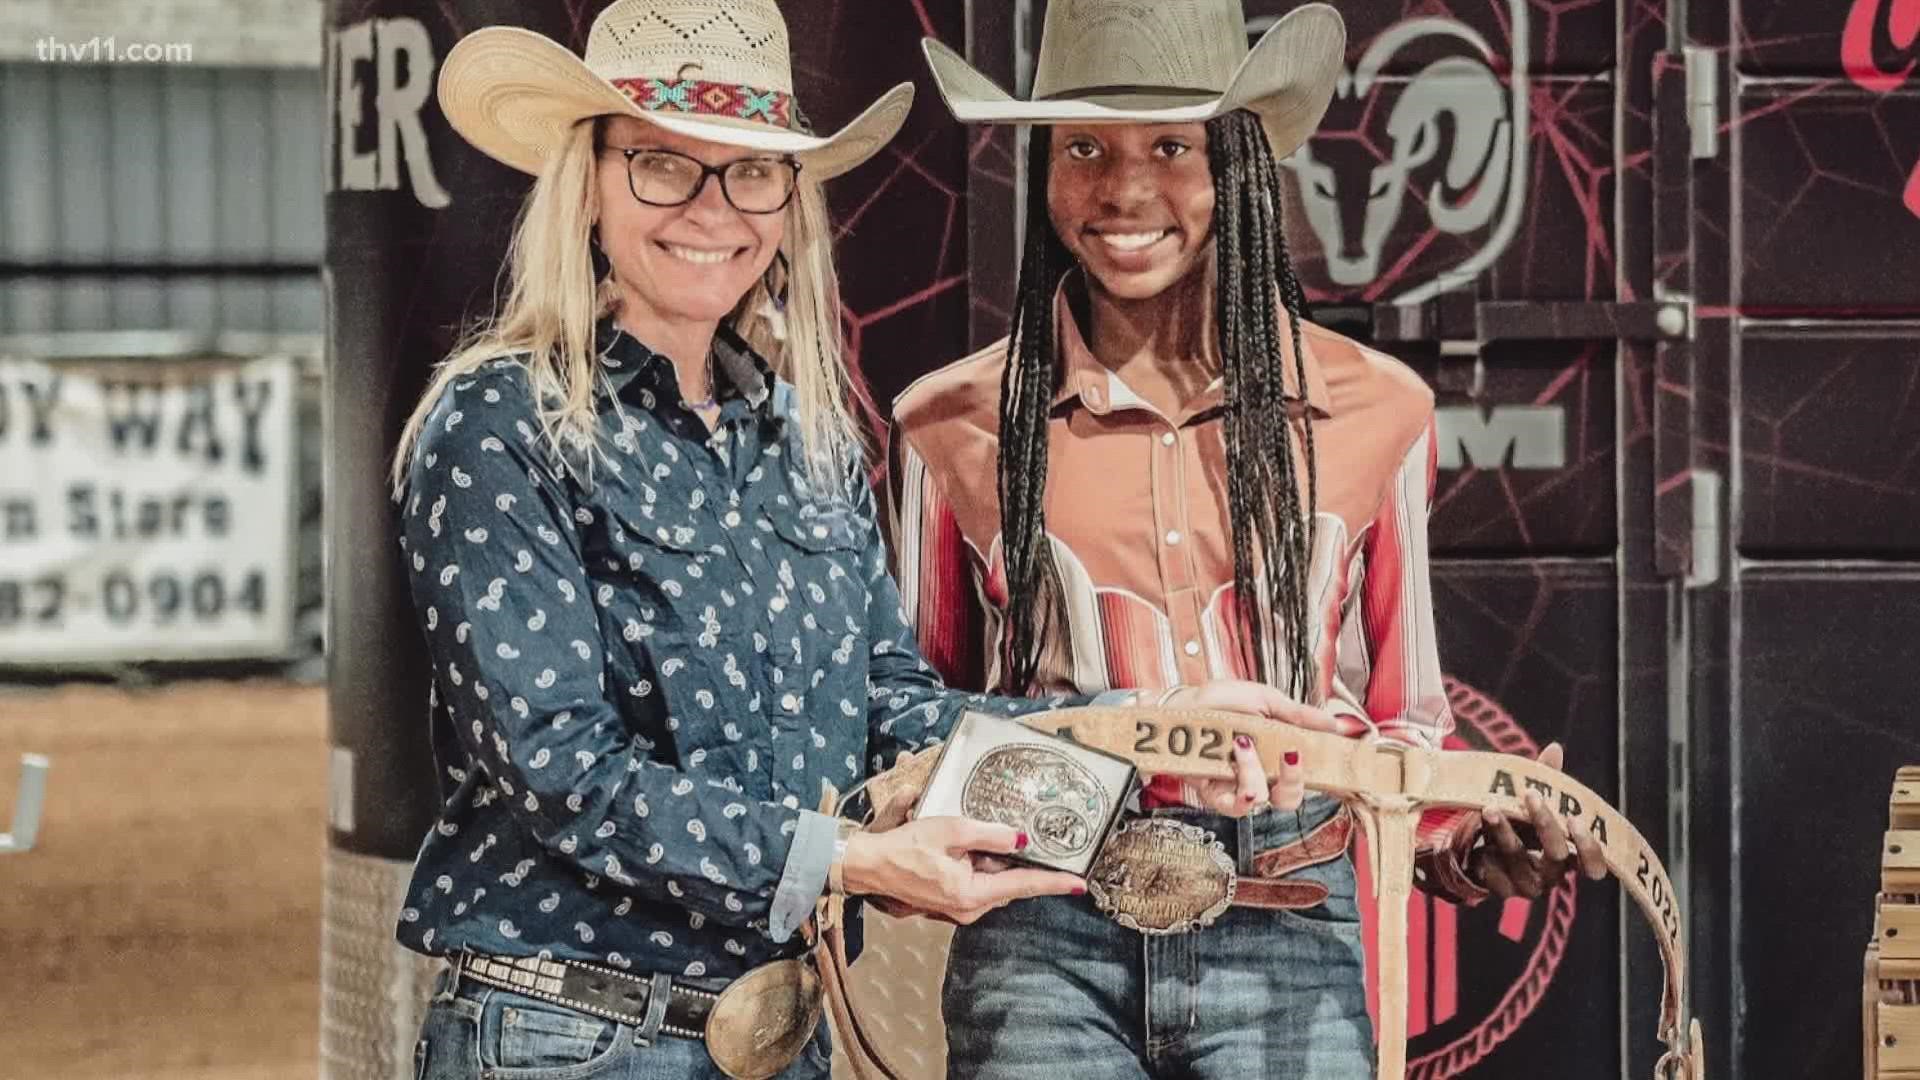 Down at Wofford Ranch in Vilonia is 13-year-old Paris Wilburd, a Black barrel racer making a big-time name for herself at rodeos both in and out of the state.